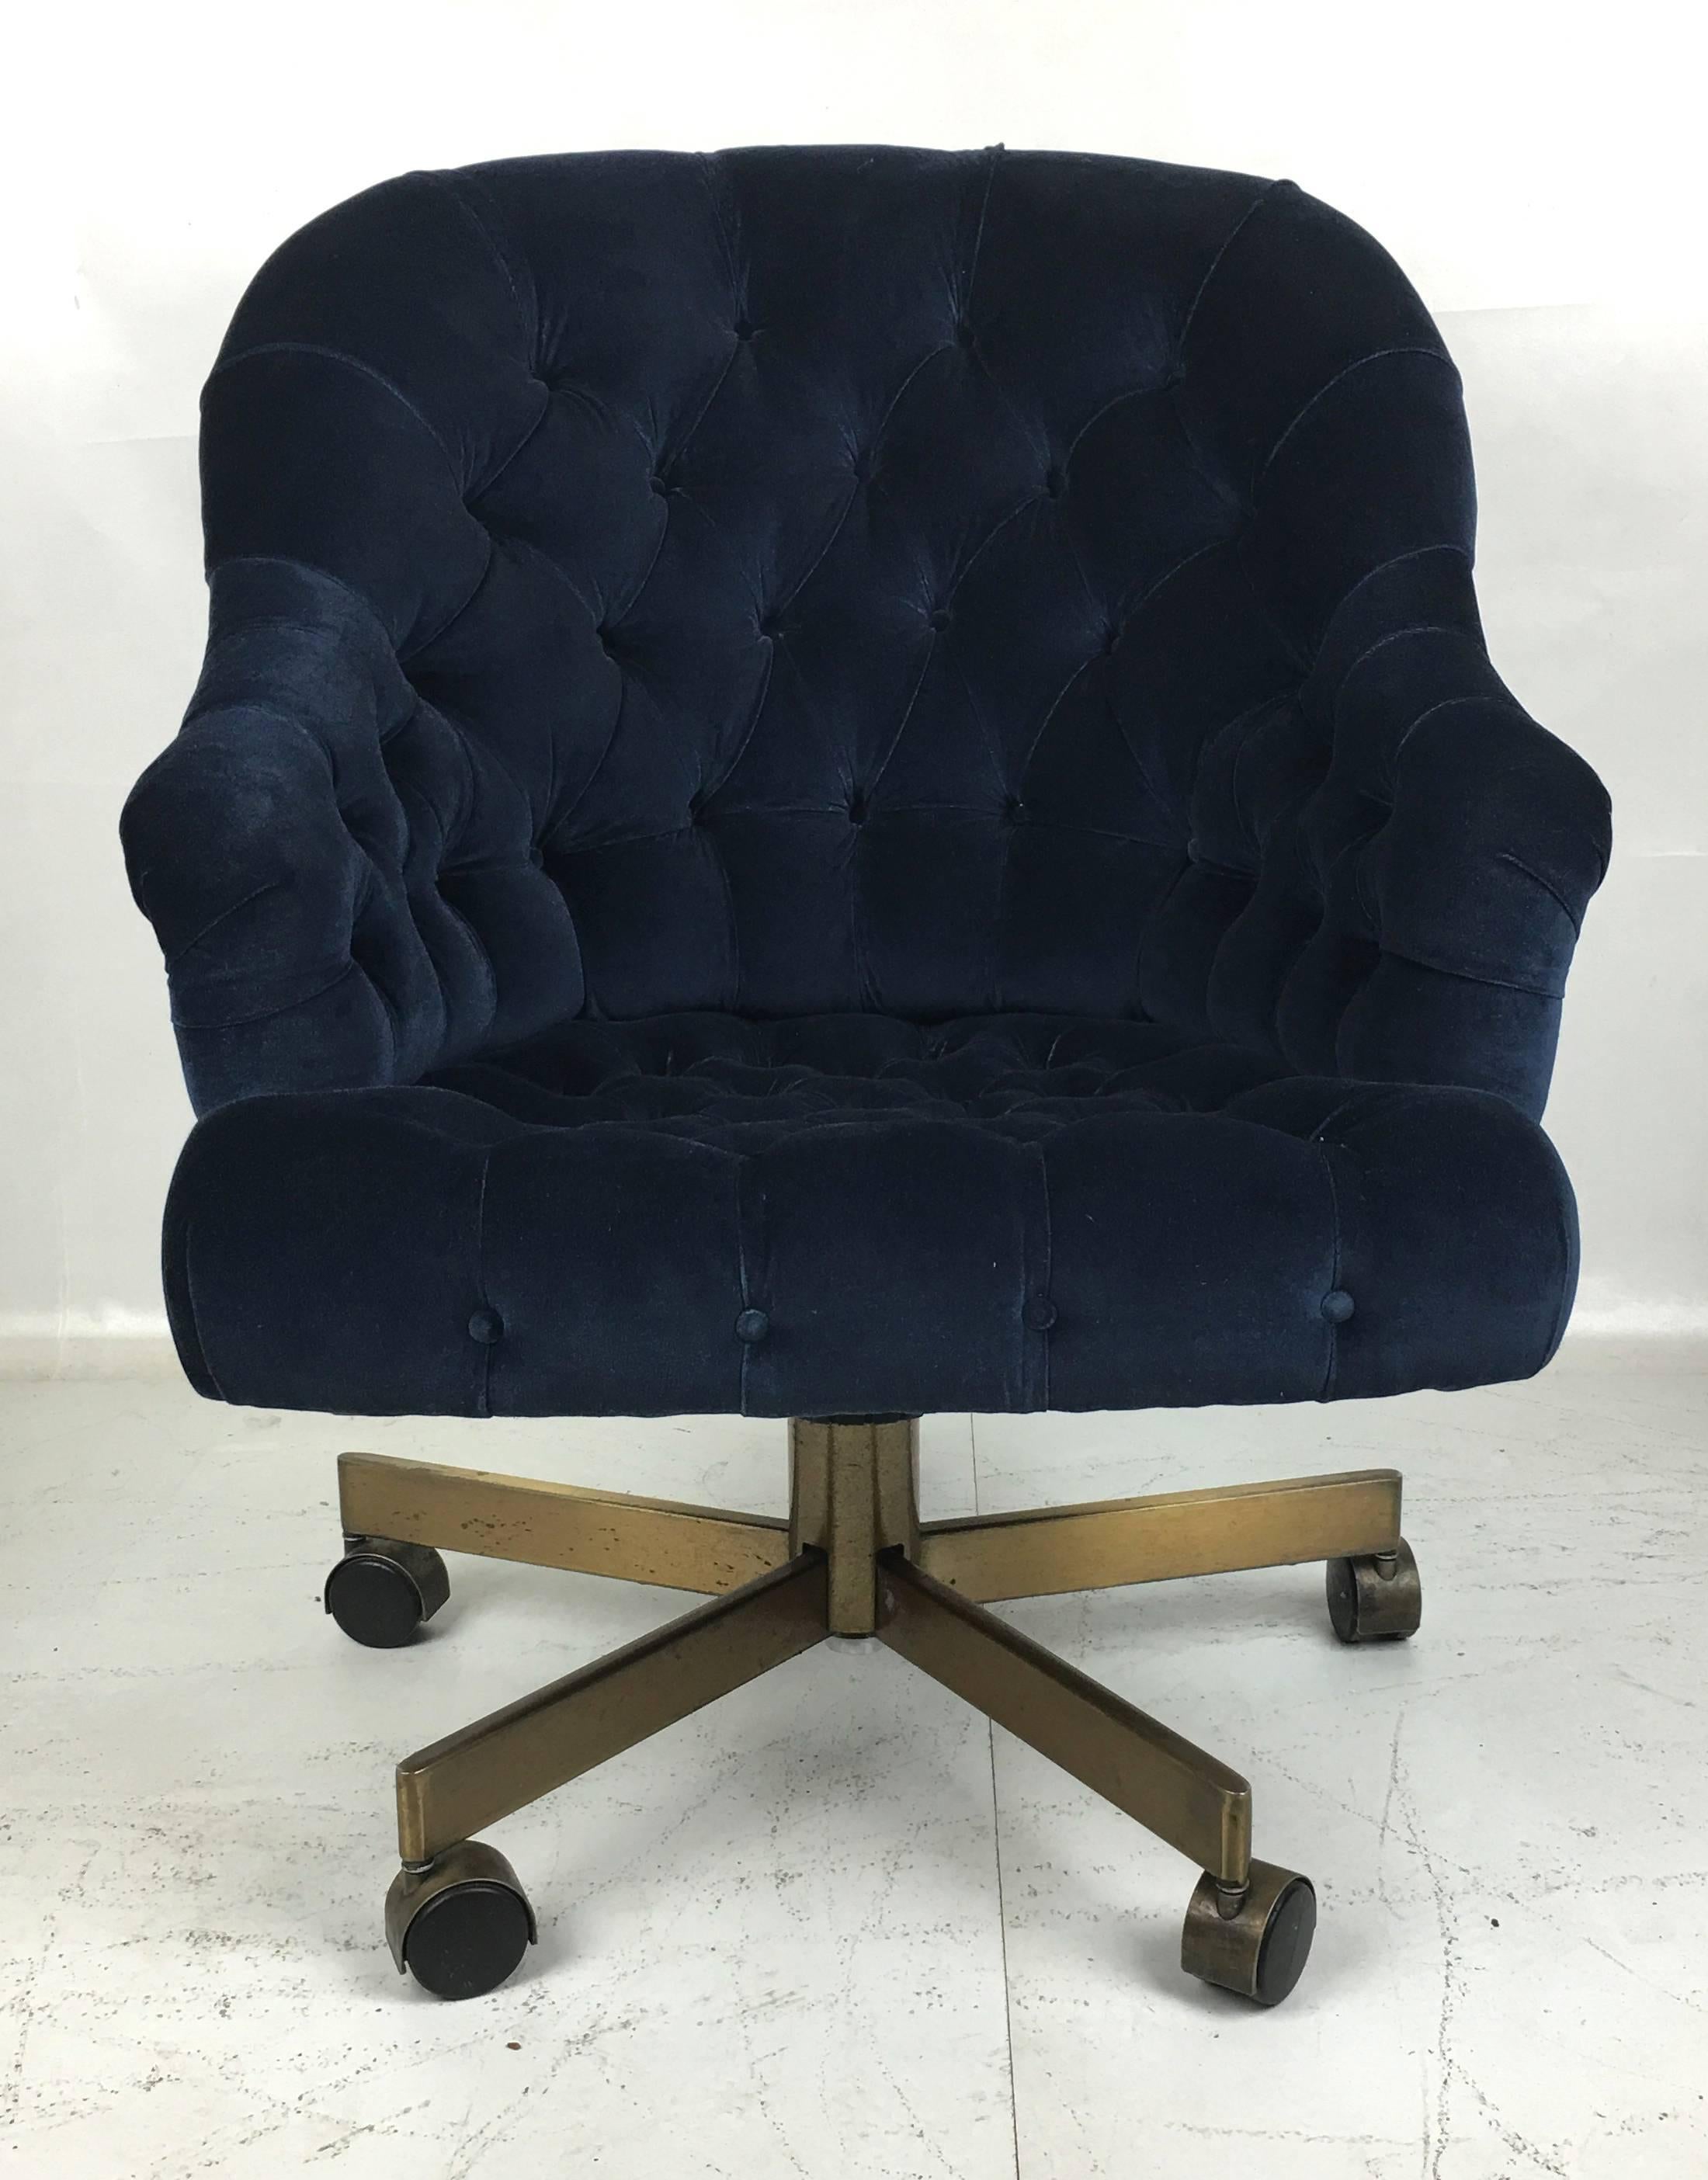 Classic Dunbar executive swivel chair freshly upholstered in luxurious Navy velvet . The chair is fully adjustable and super comfortable. Raised on a bronze-plated steel base with bronze hooded casters.  